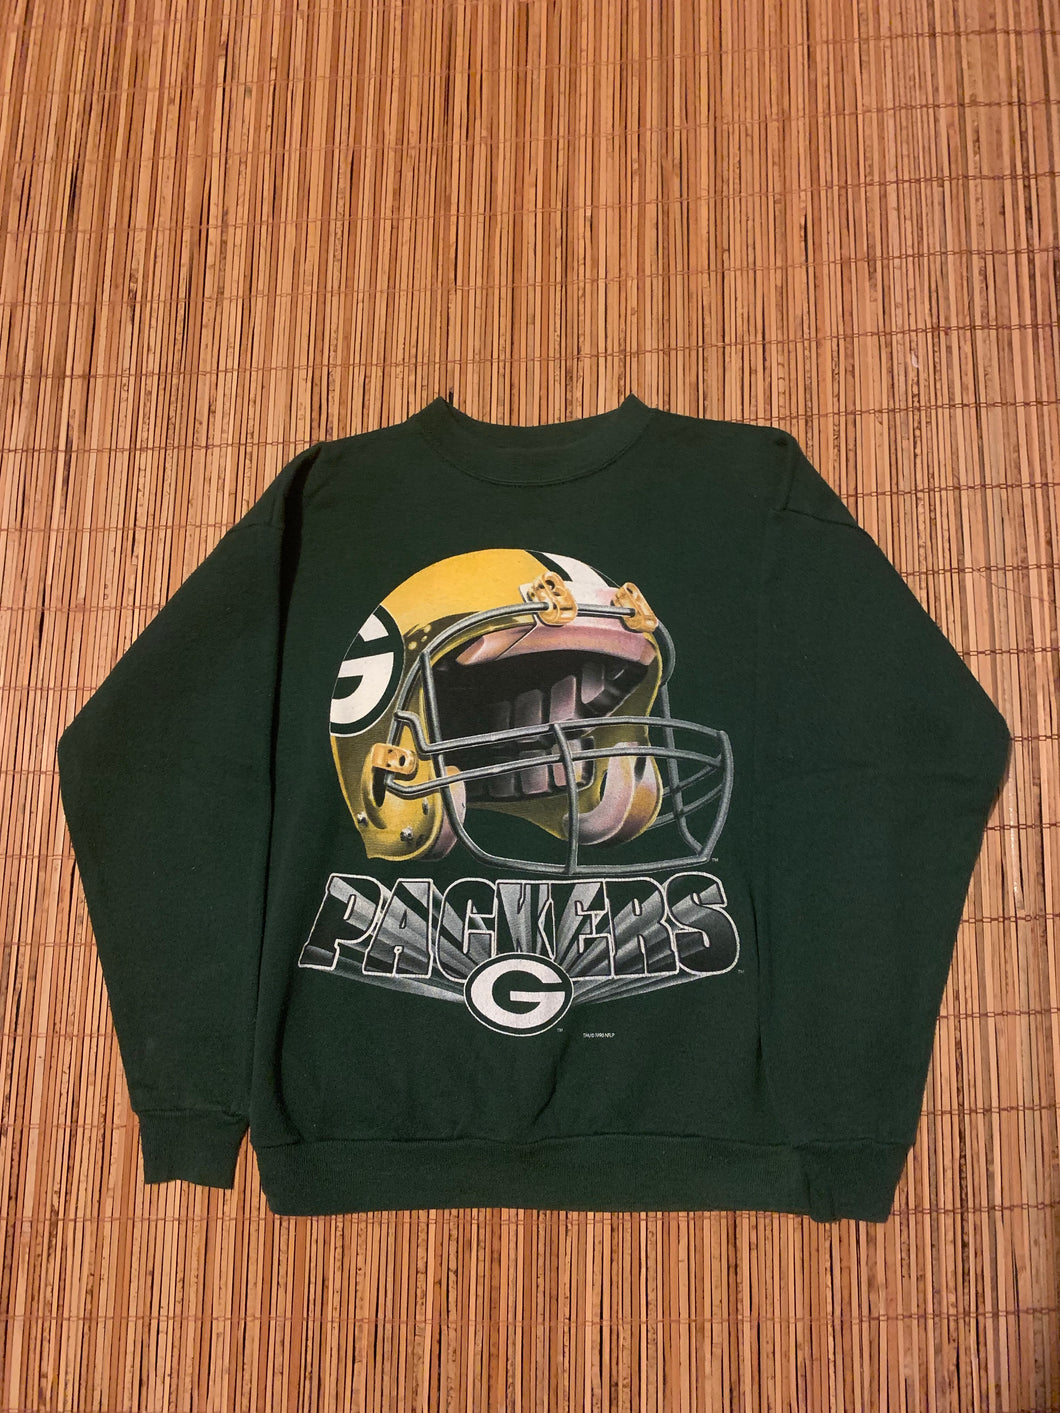 M - Vintage 1996 Green Bay Packers Sweater